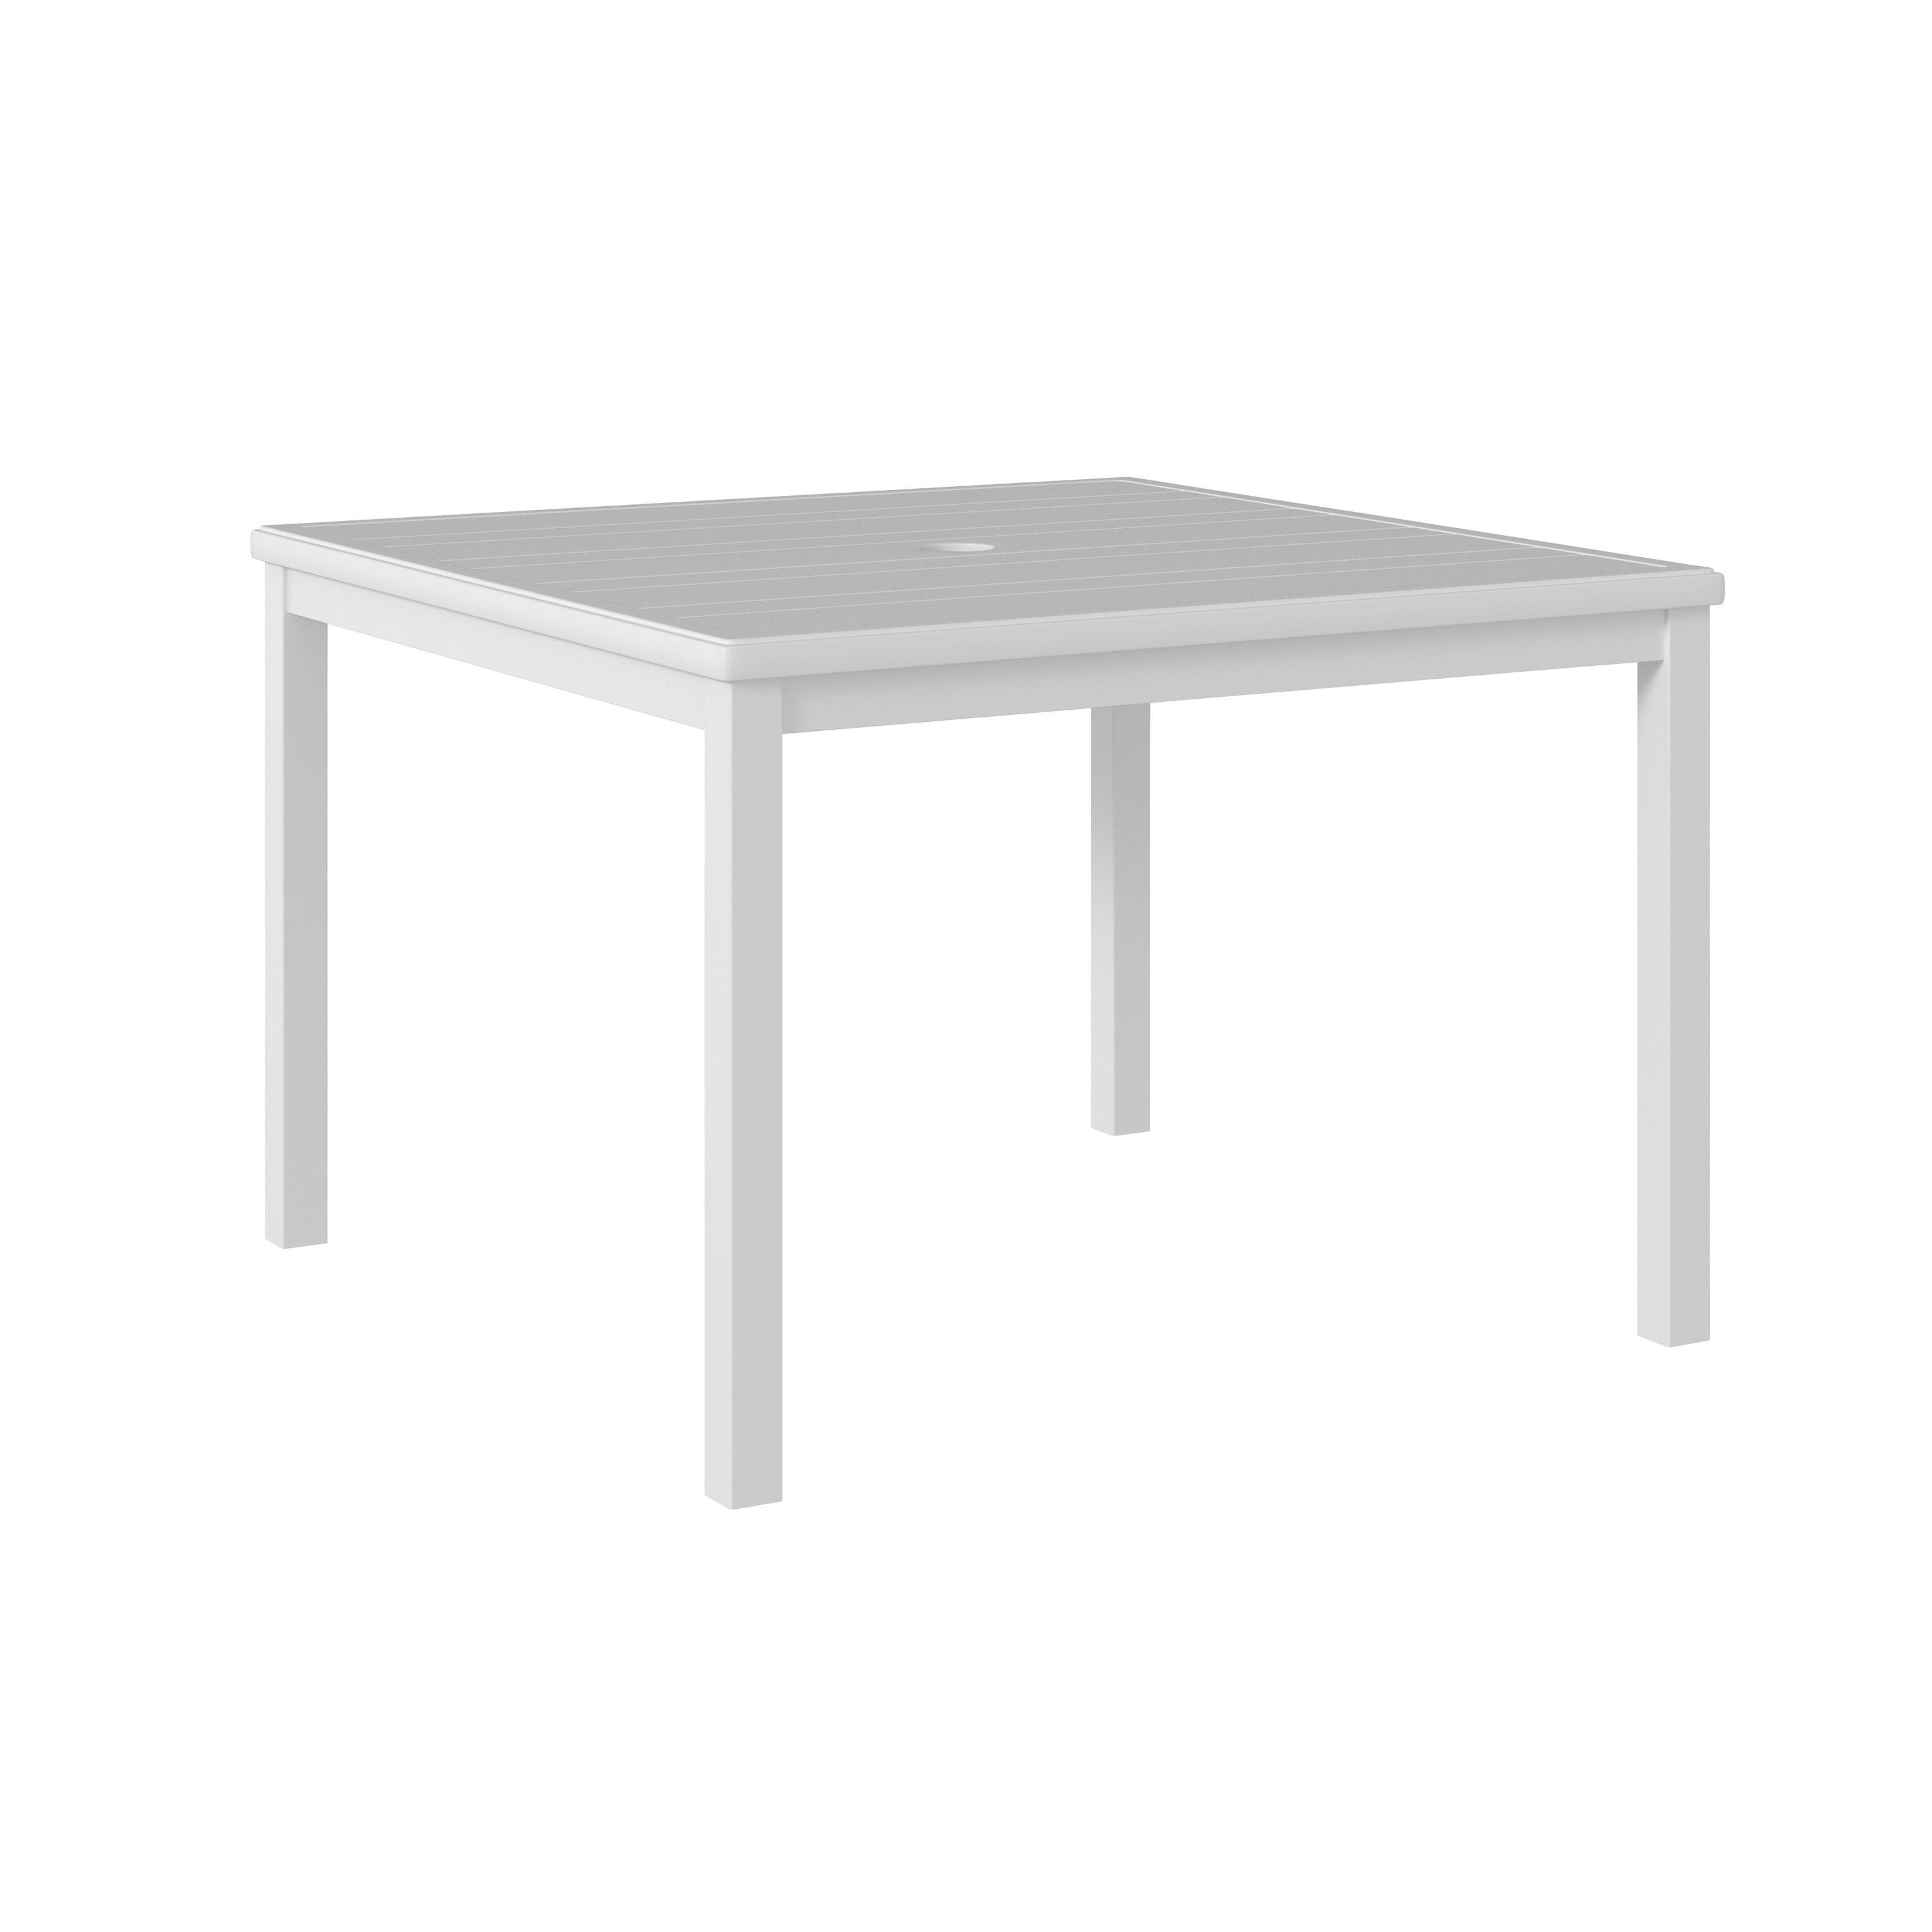 42" W x 42" L allen + roth Alton Square Outdoor Dining Table w/ Umbrella Hole $86.80 + Free Shipping